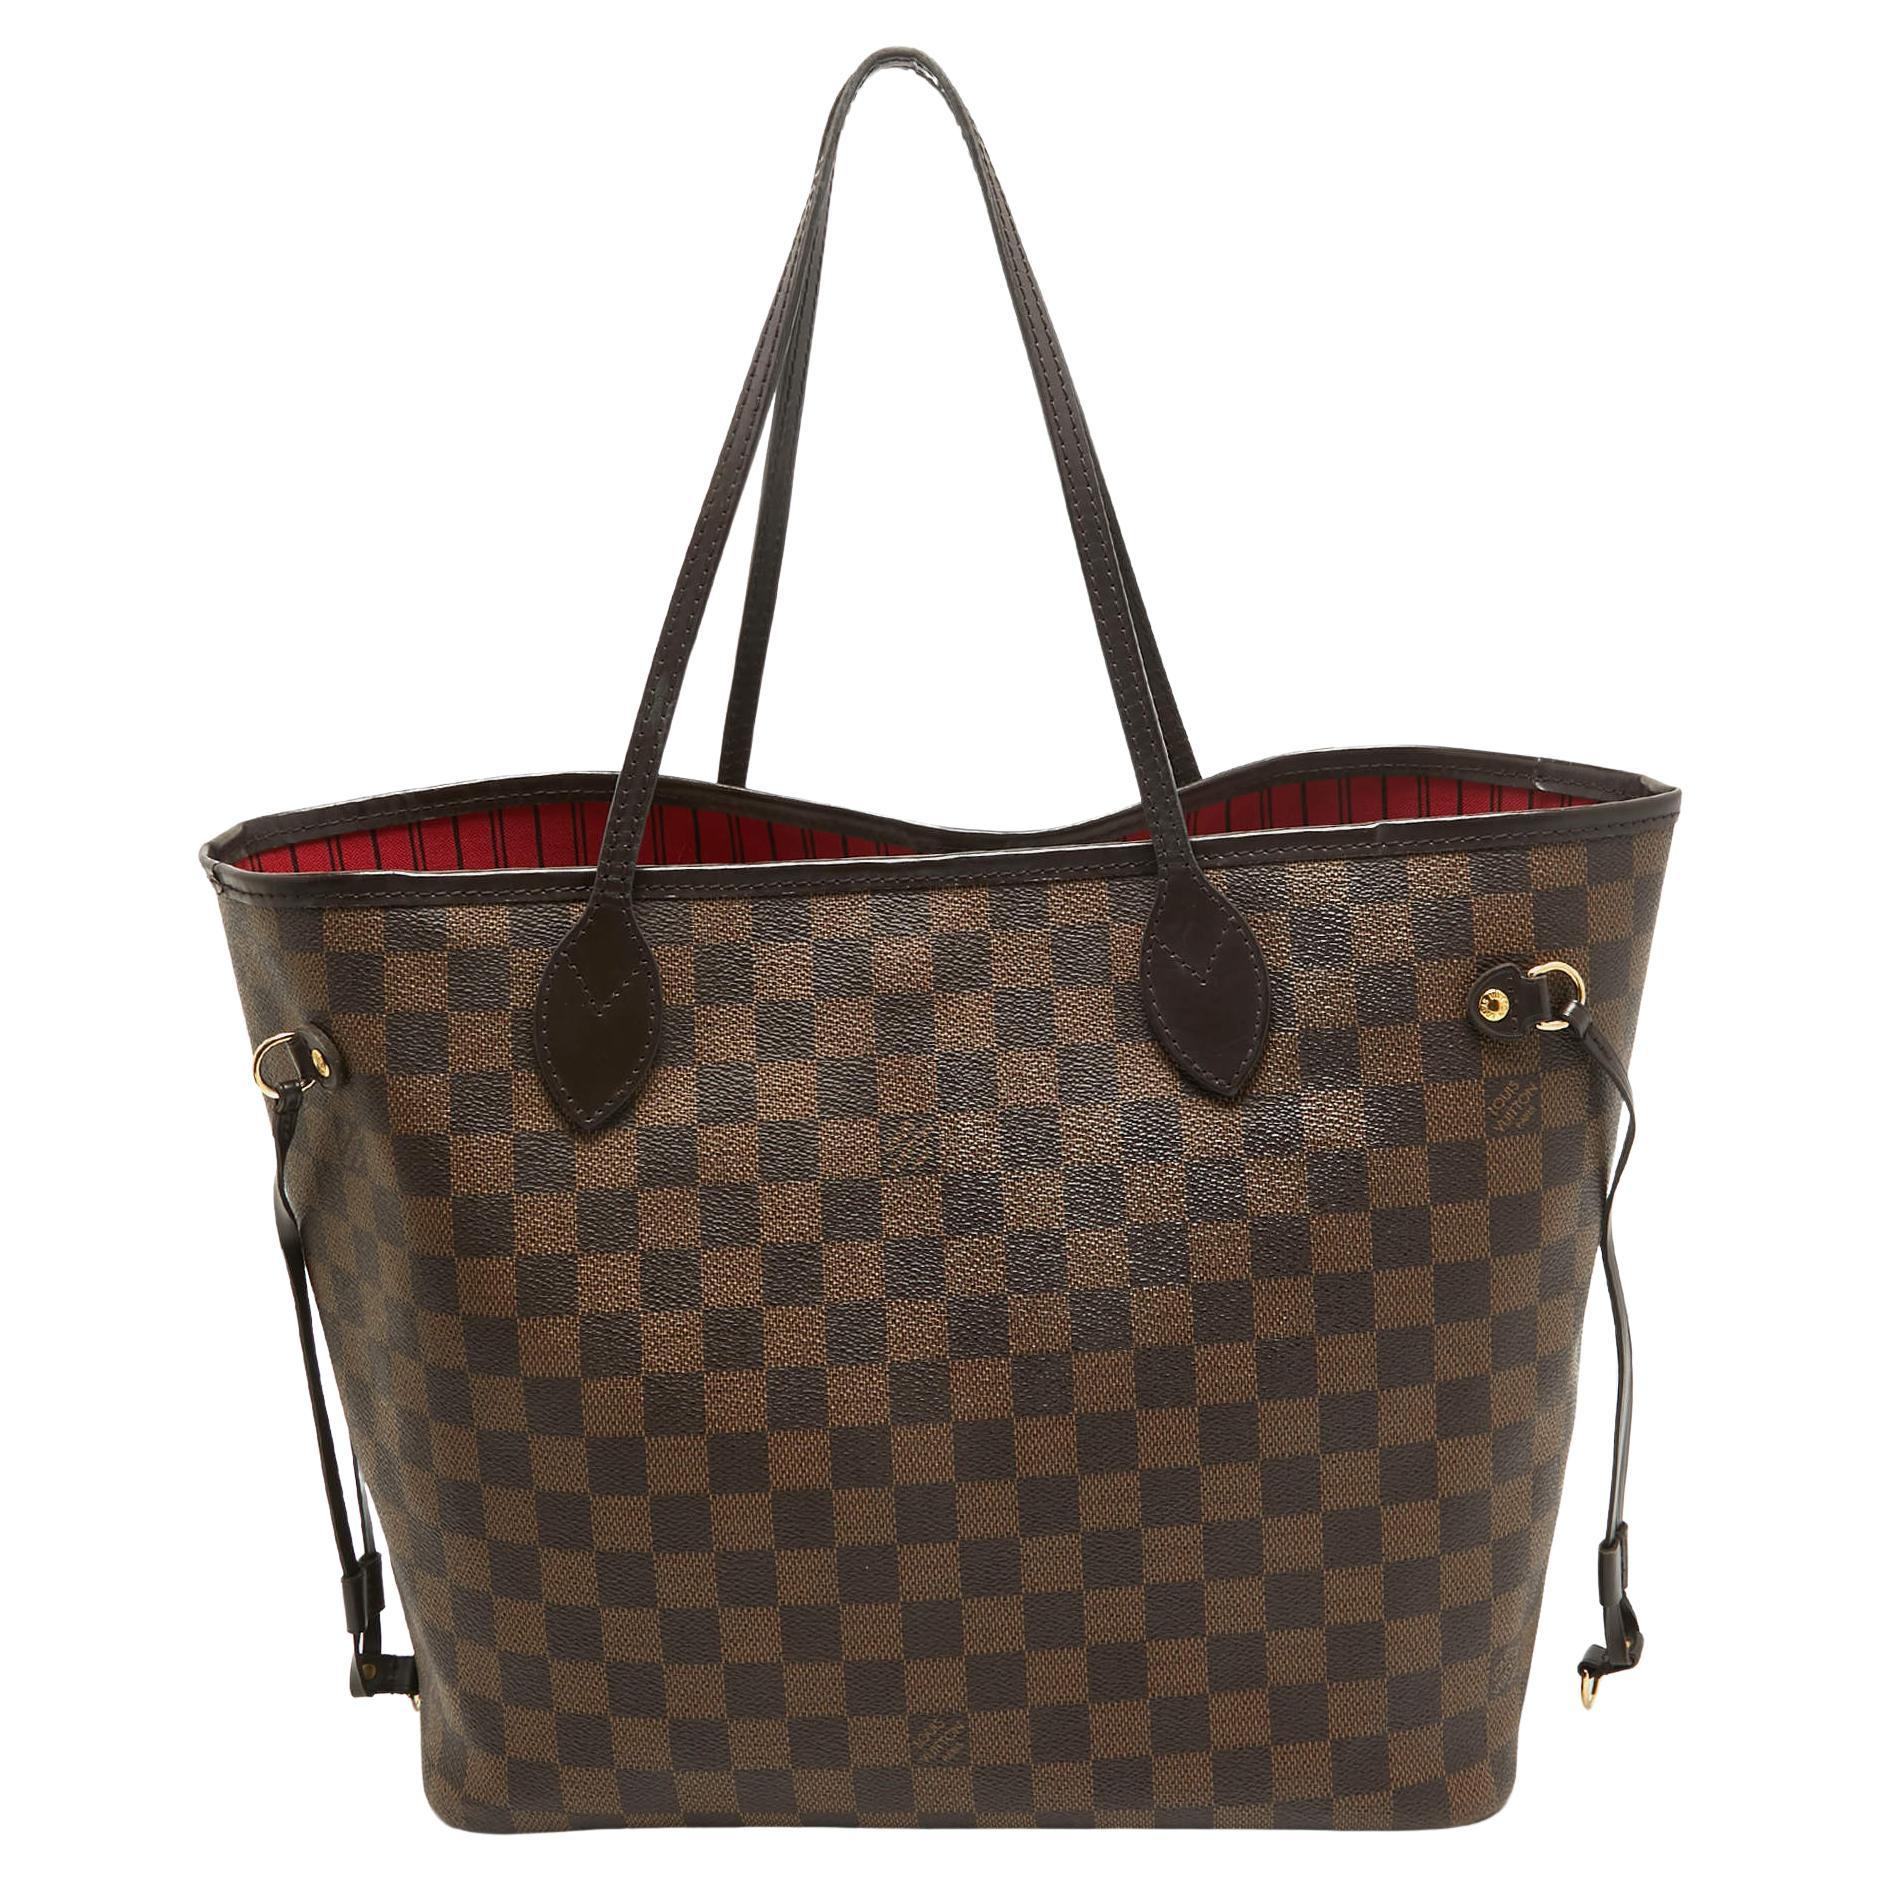 Introduced in 2007, the Neverfull by Louis Vuitton is applauded for its innovative design and faultless craftsmanship. This MM bag comes crafted from the signature Monogram canvas, and its luxurious features contribute to its timeless elegance. With